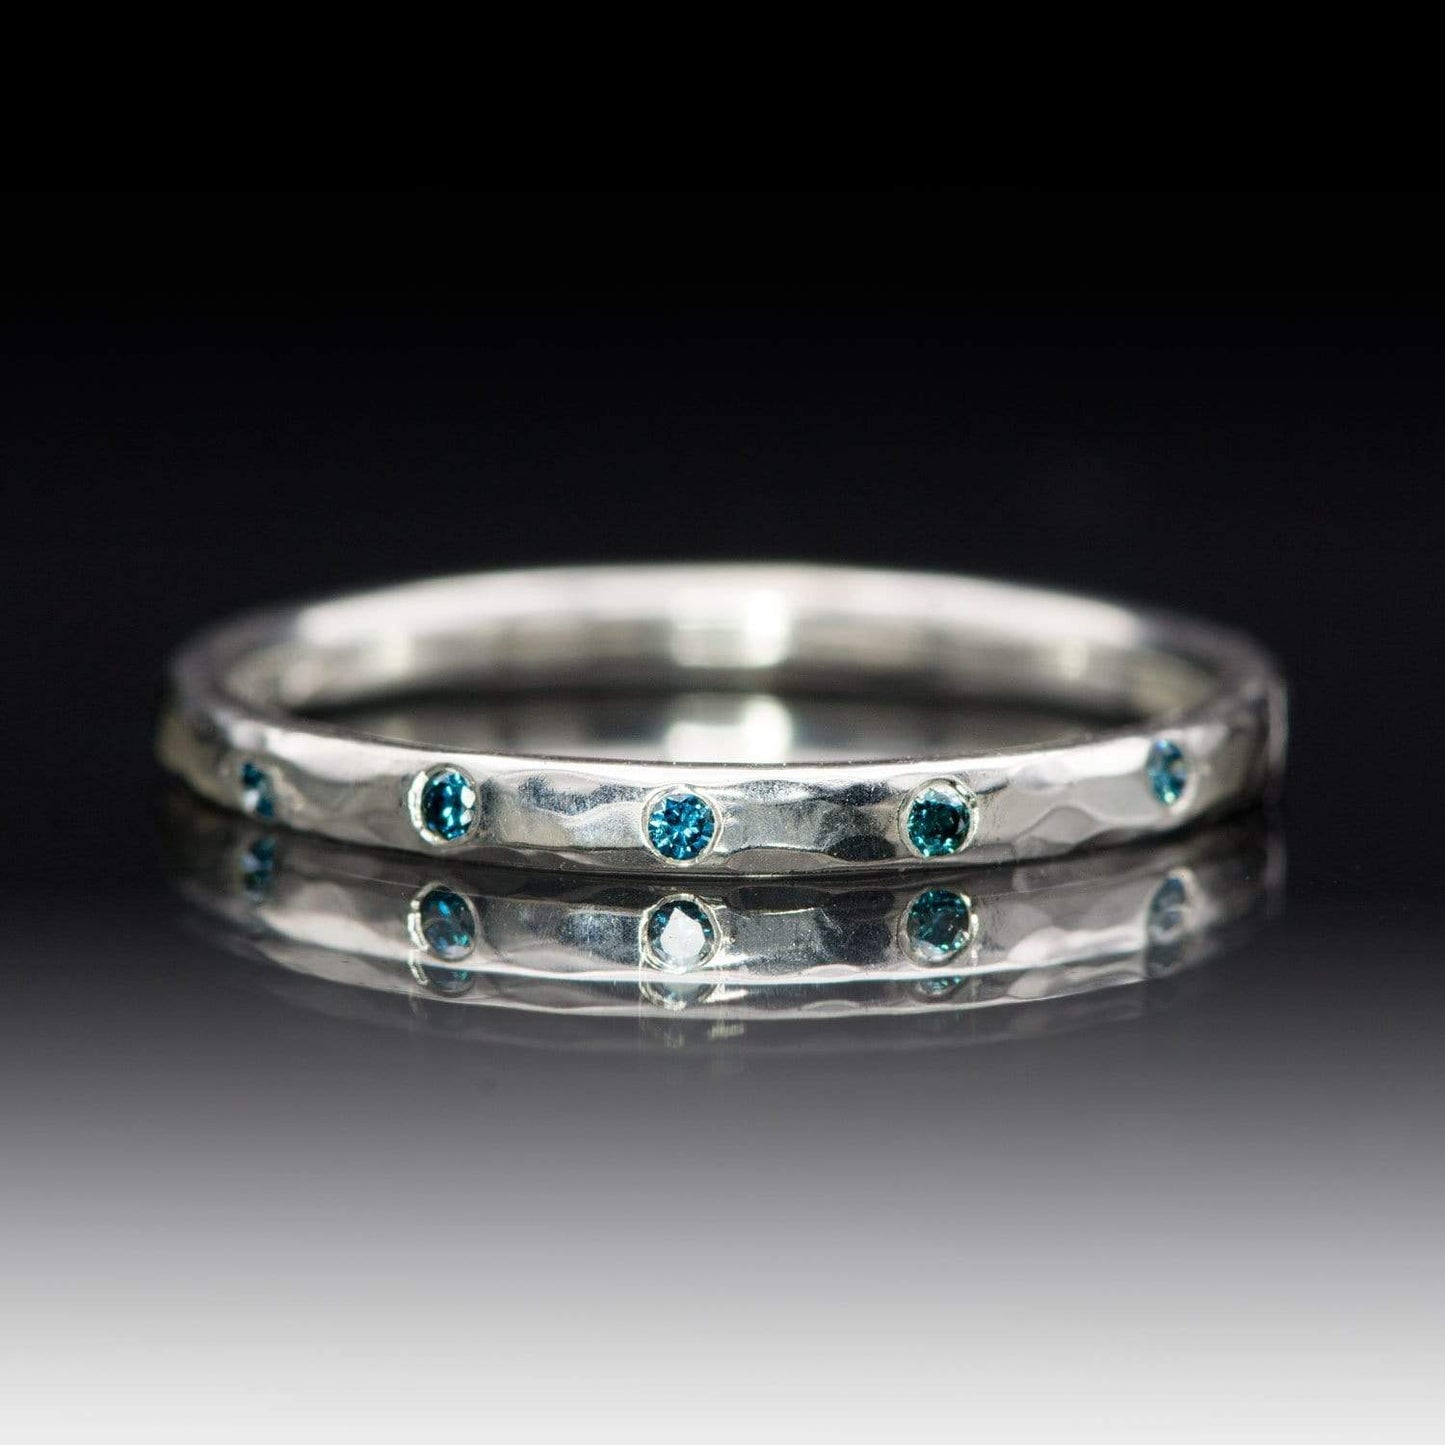 Skinny Teal Diamond Wedding Ring Thin Hammered Texture Wedding Band 14kPD White Gold / All Teal Diamonds / 5 Diamonds Ring by Nodeform